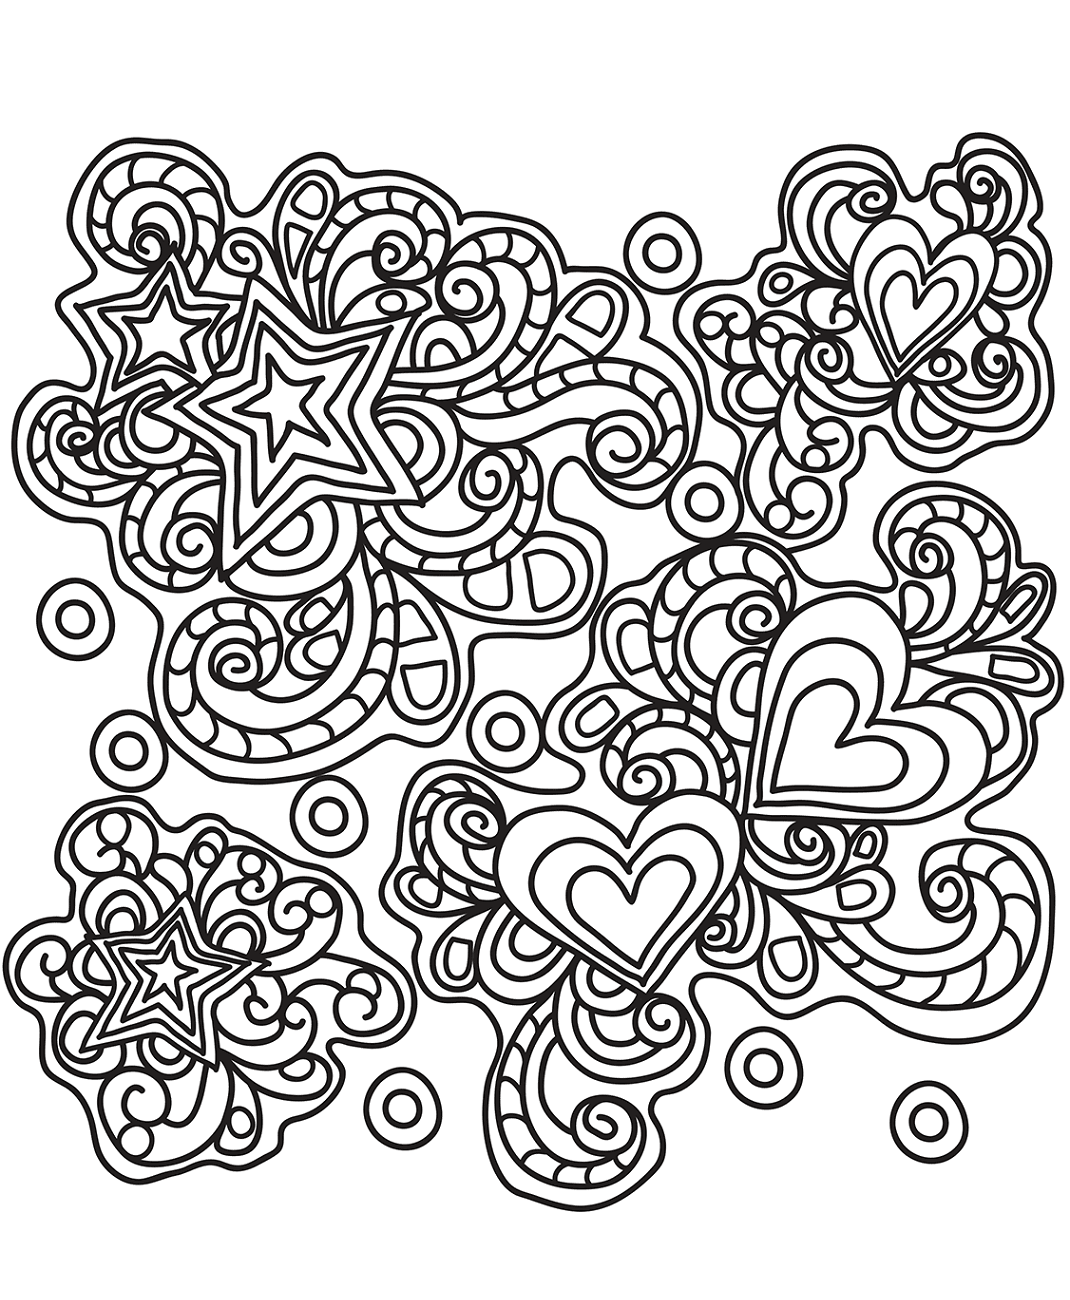 Doodle Art Coloring Pages   Free Printable Coloring Pages for Kids